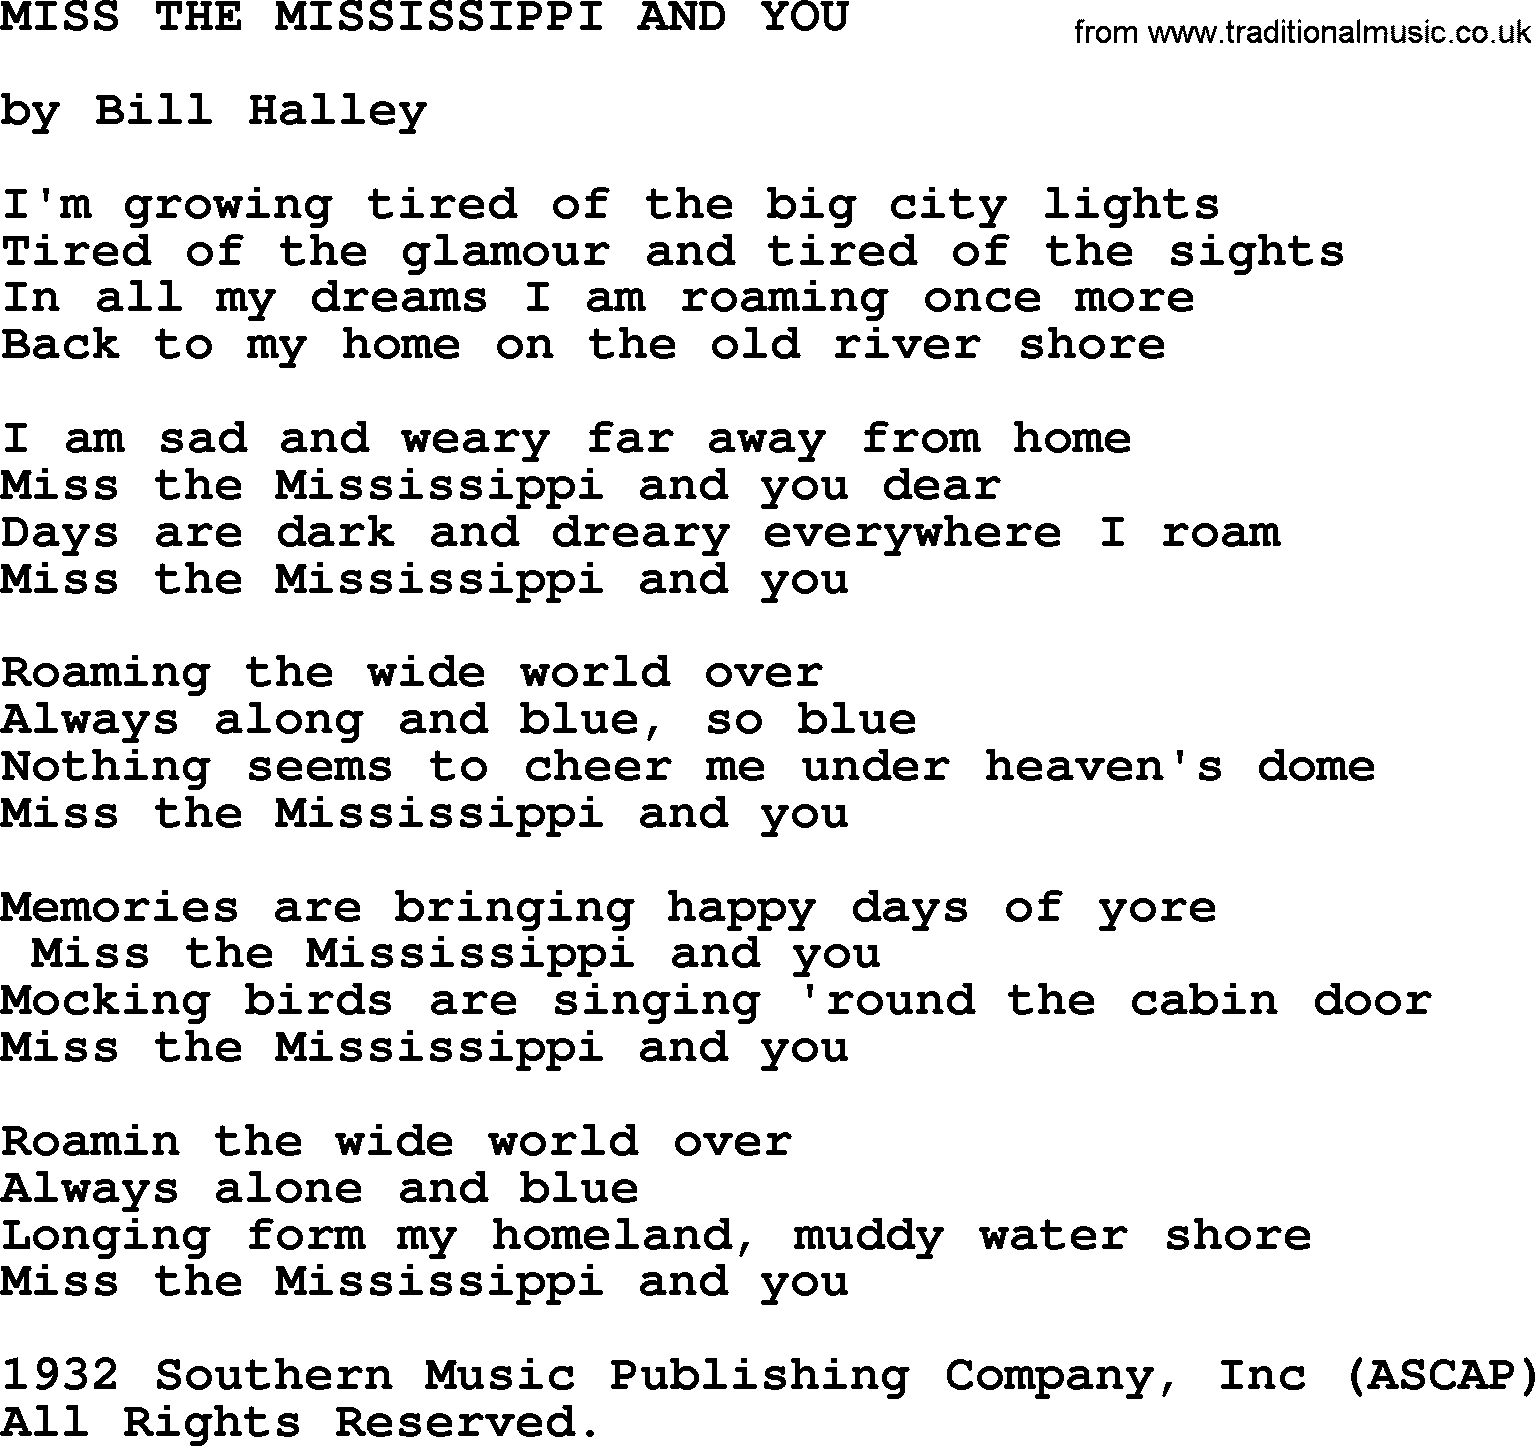 Merle Haggard song: Miss The Mississippi And You, lyrics.